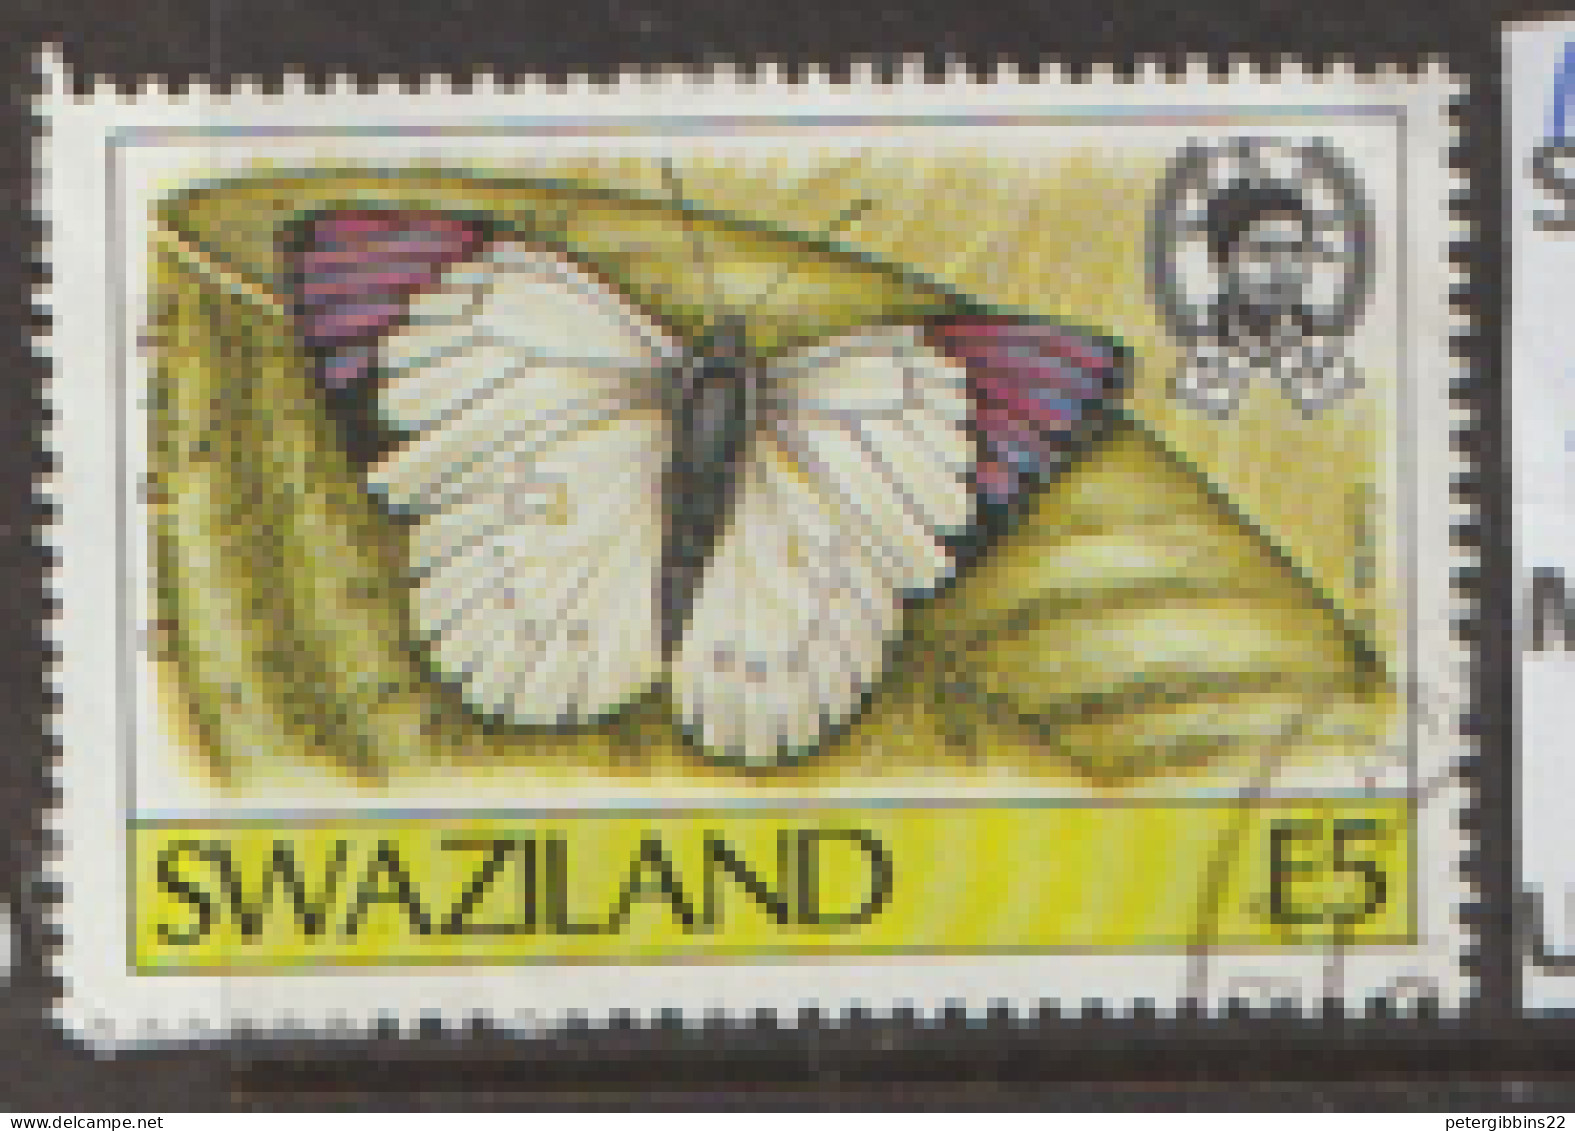 Swaziland  1987  SG 527  E5  Butterfly Fine Used - Swaziland (...-1967)